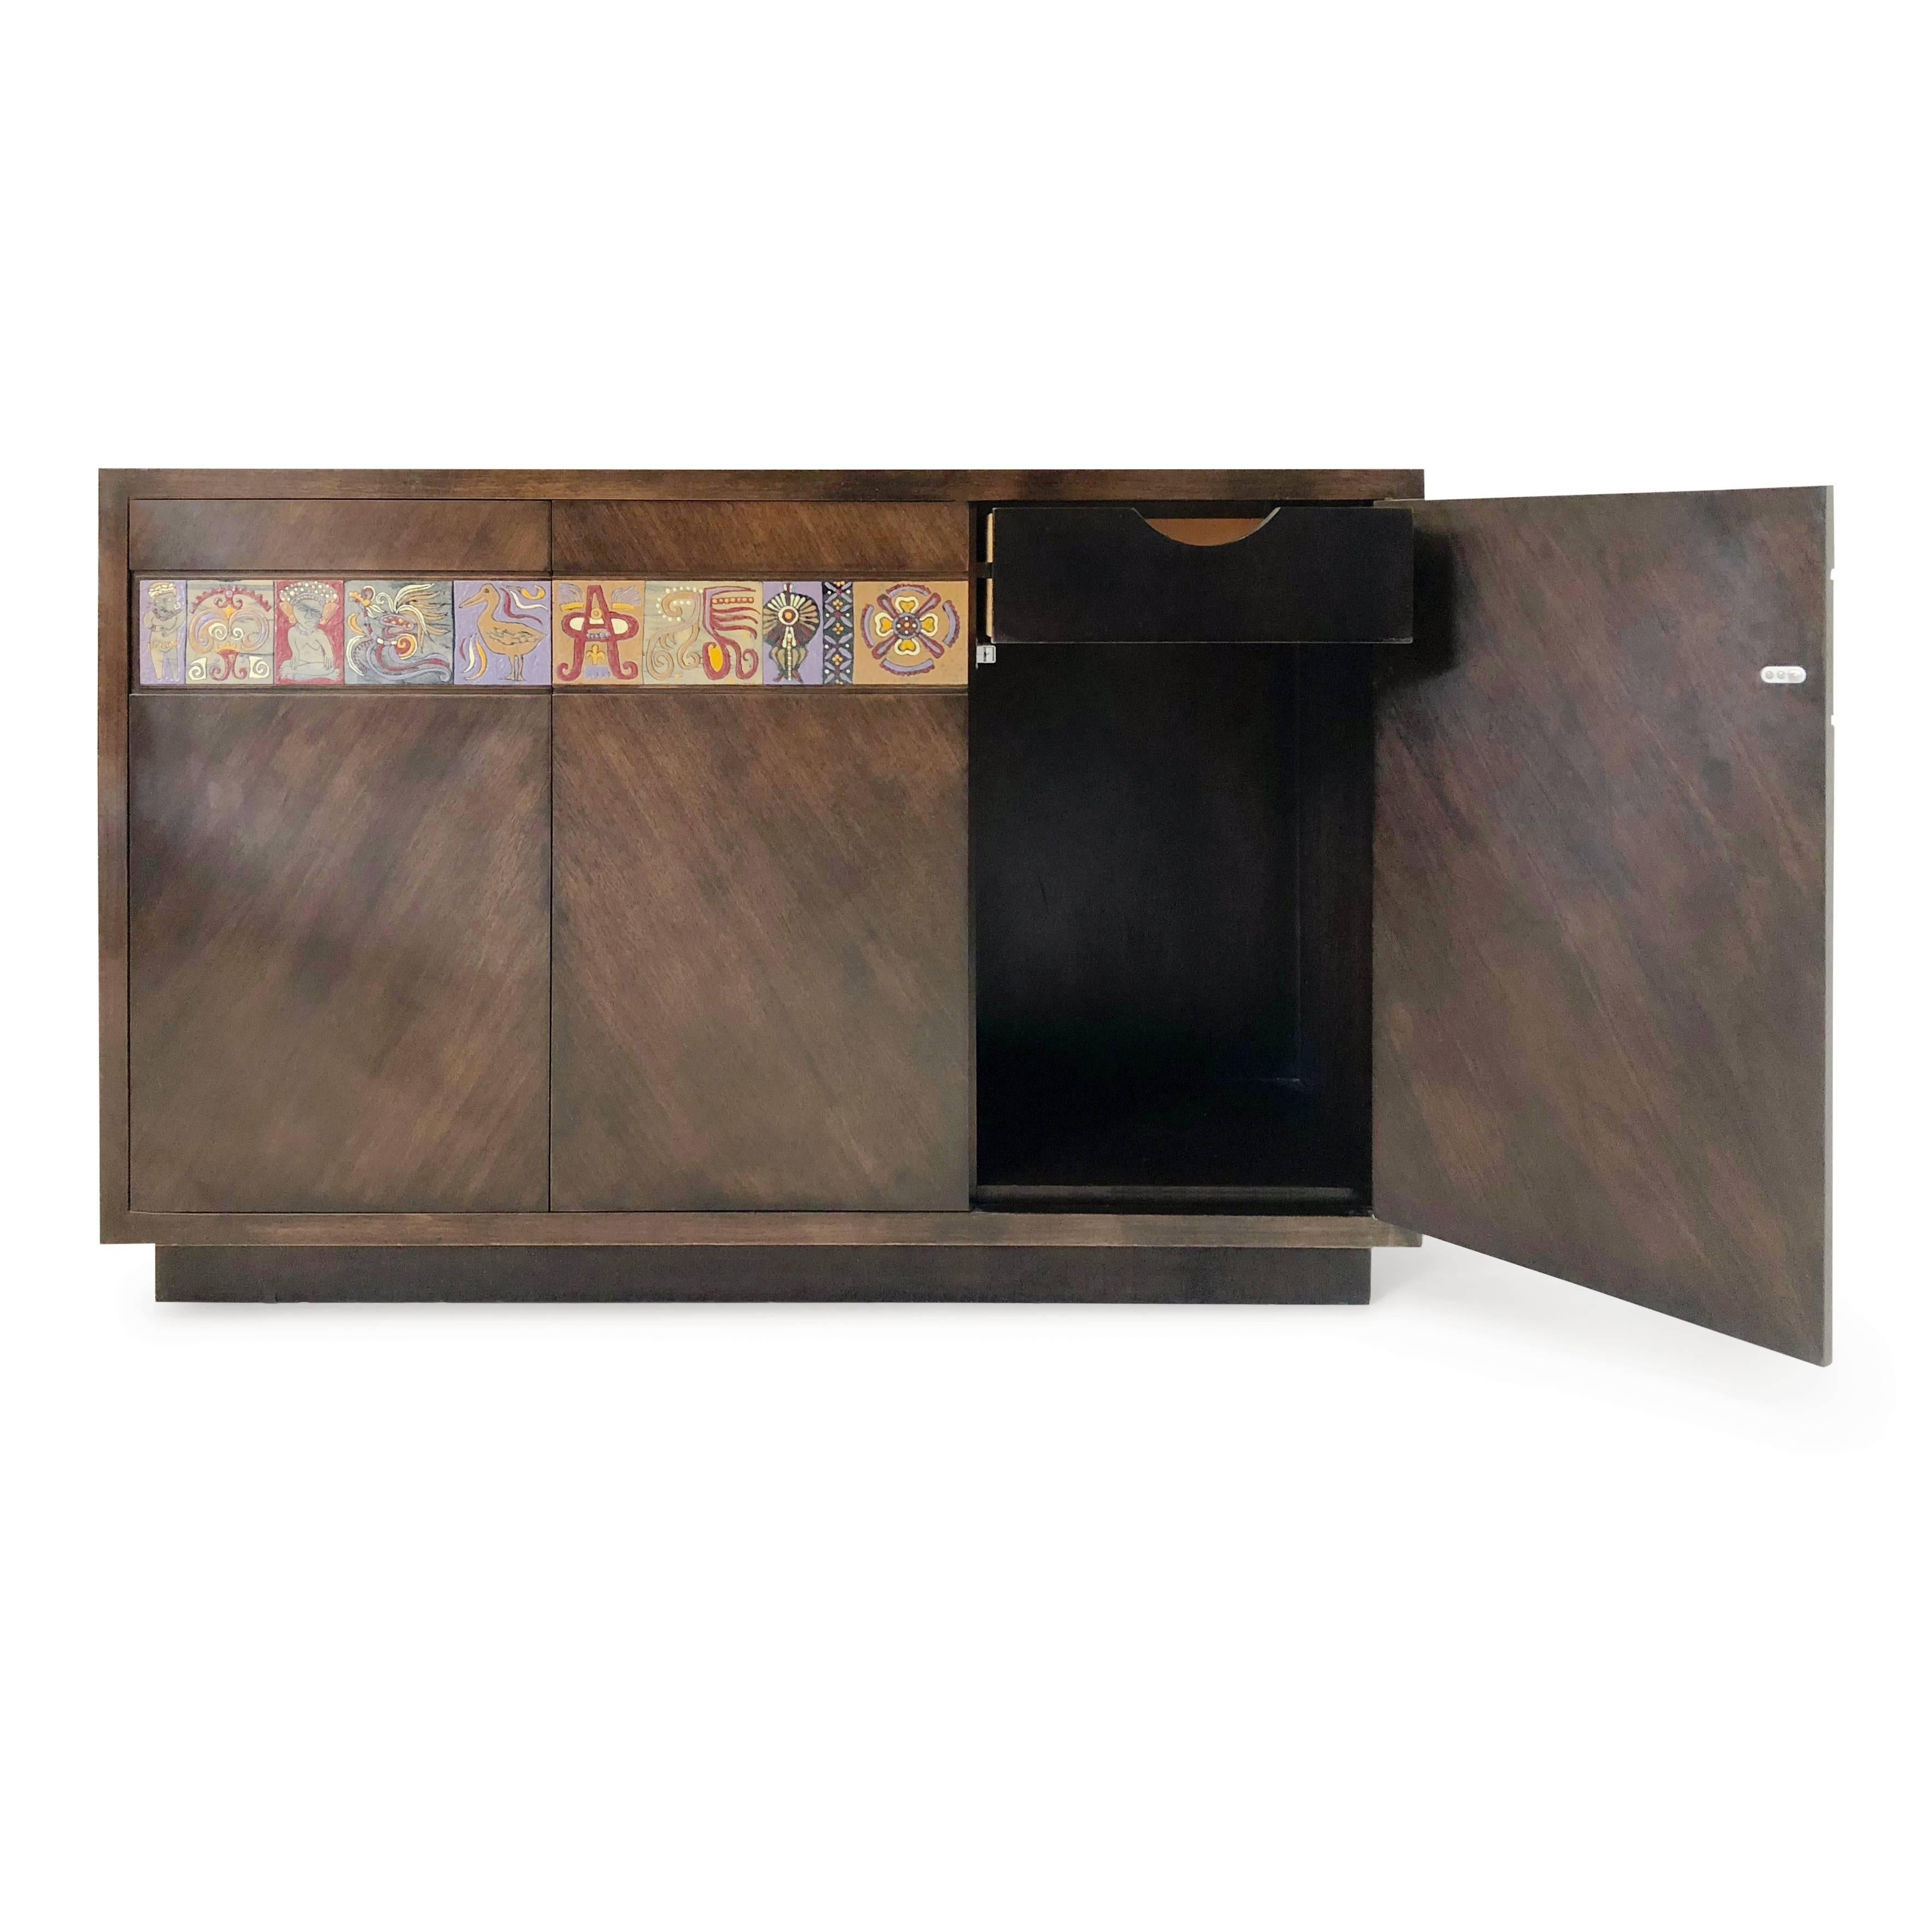 Beautifully constructed Mexican modernist credenza decorated with enameled tile inserts. These colorful tiles have been hand-painted with Primitive motifs and encased in a strip along the top portion of the credenza. The doors of the cabinet have